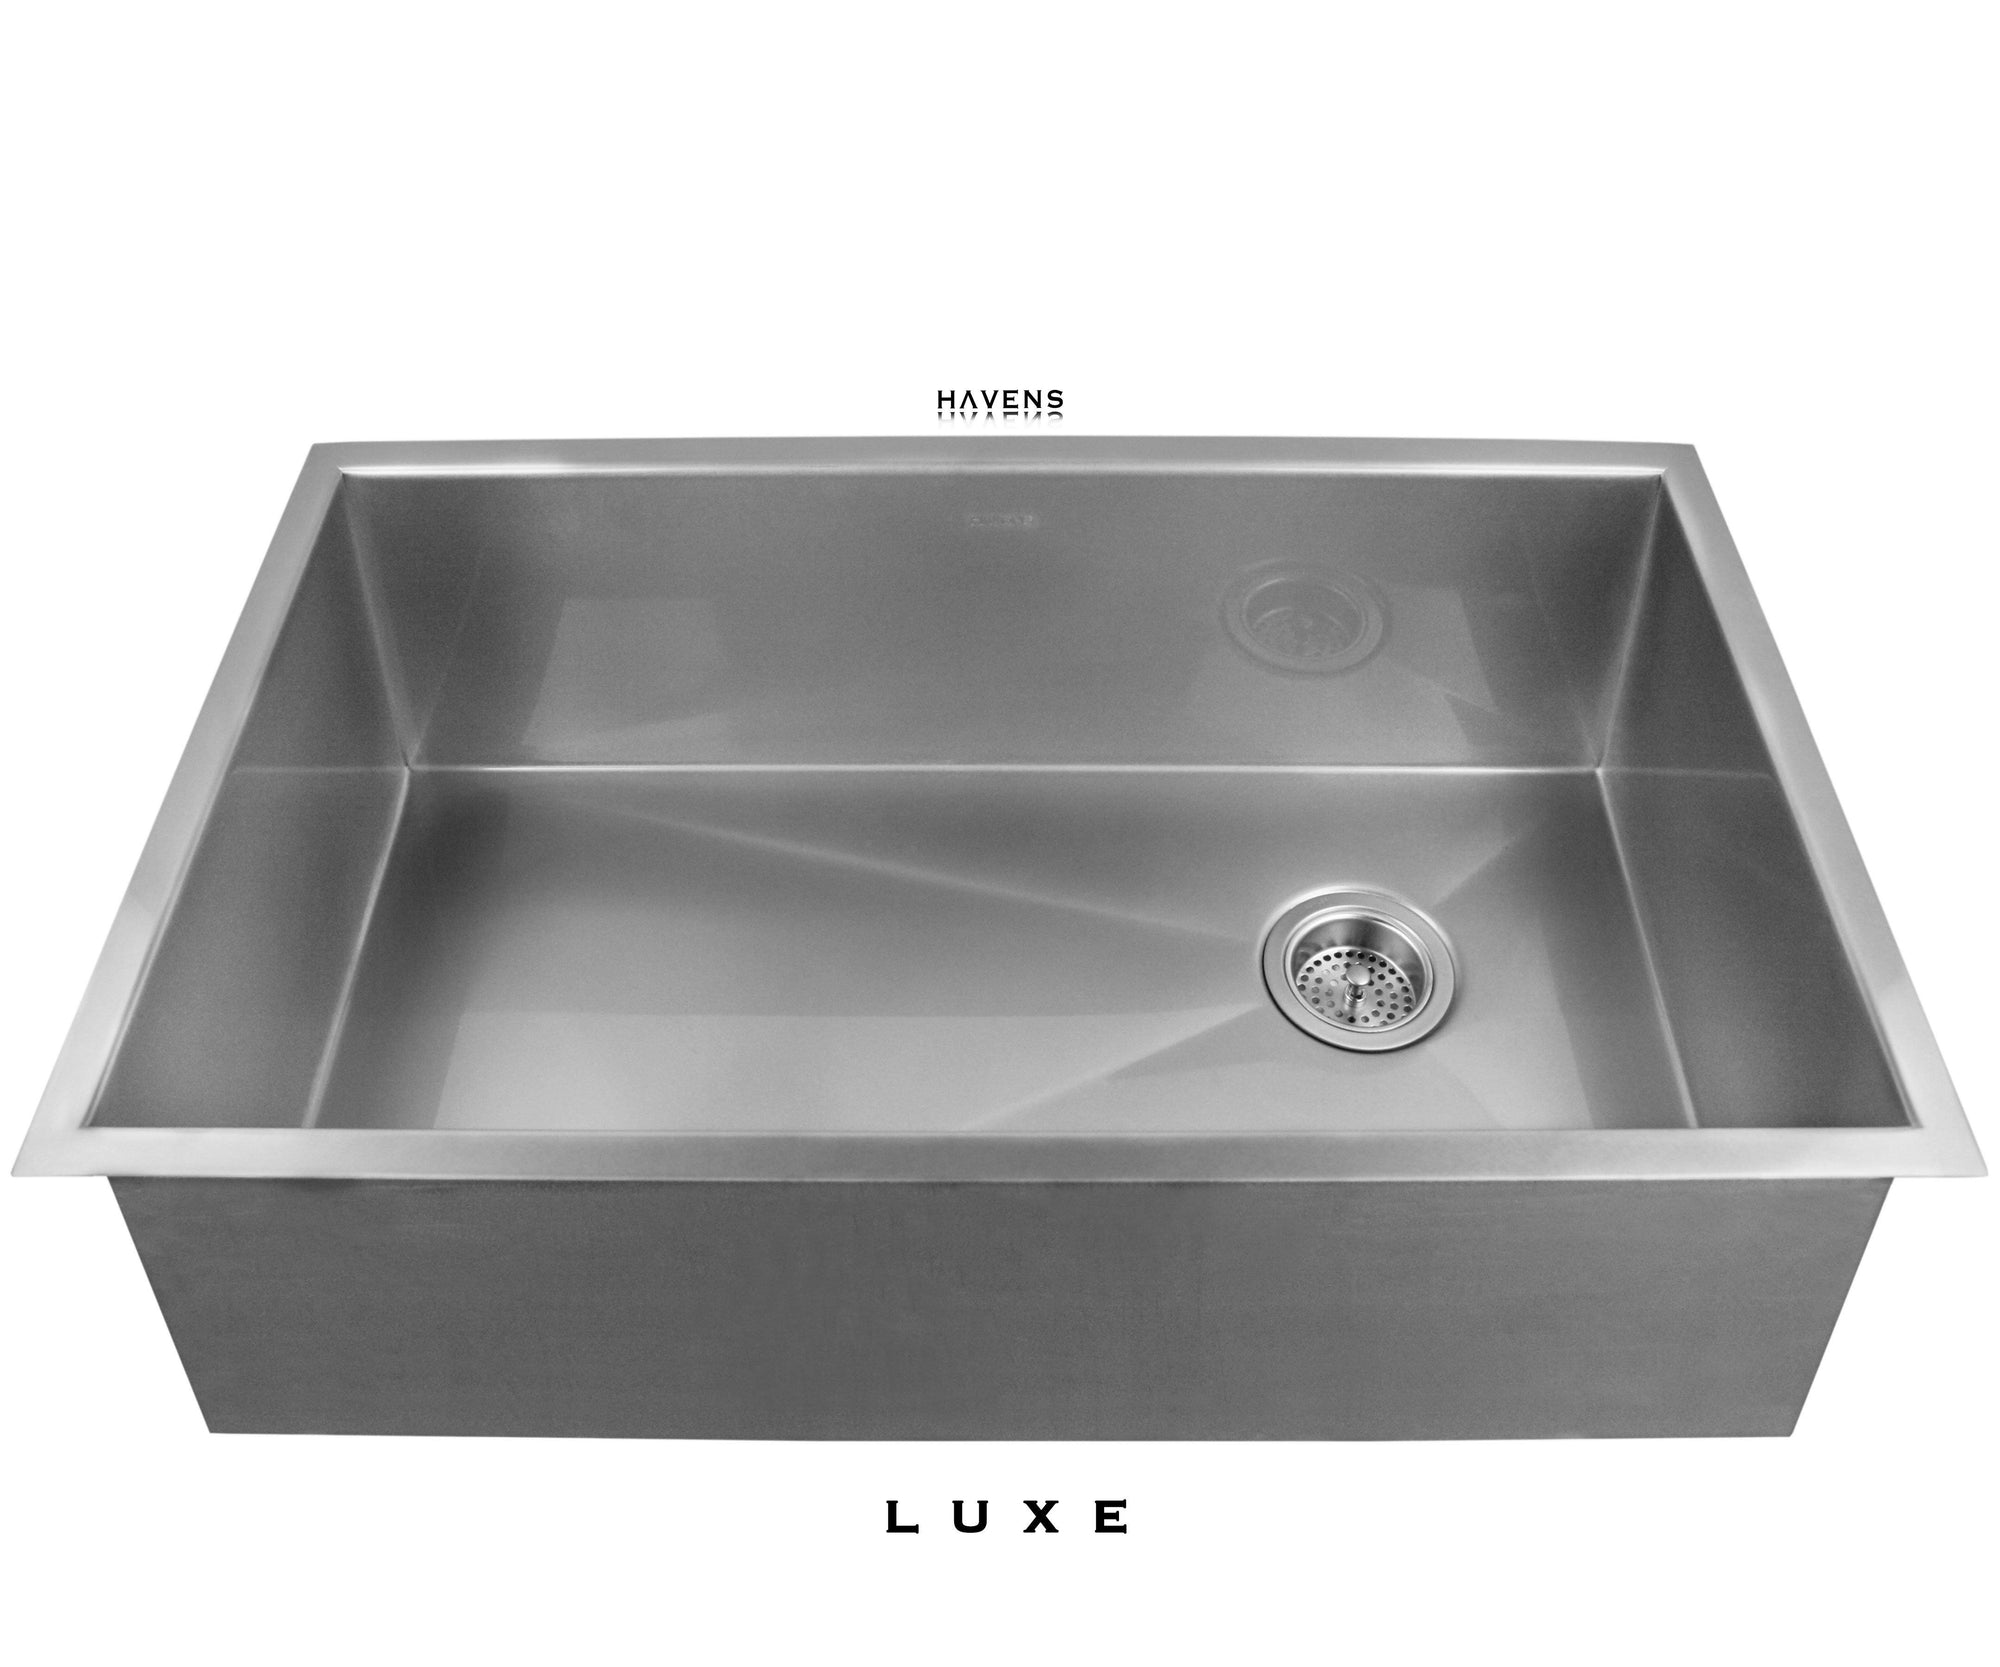 Stainless under mount 16 gauge kitchen sink made by Havens in the USA.